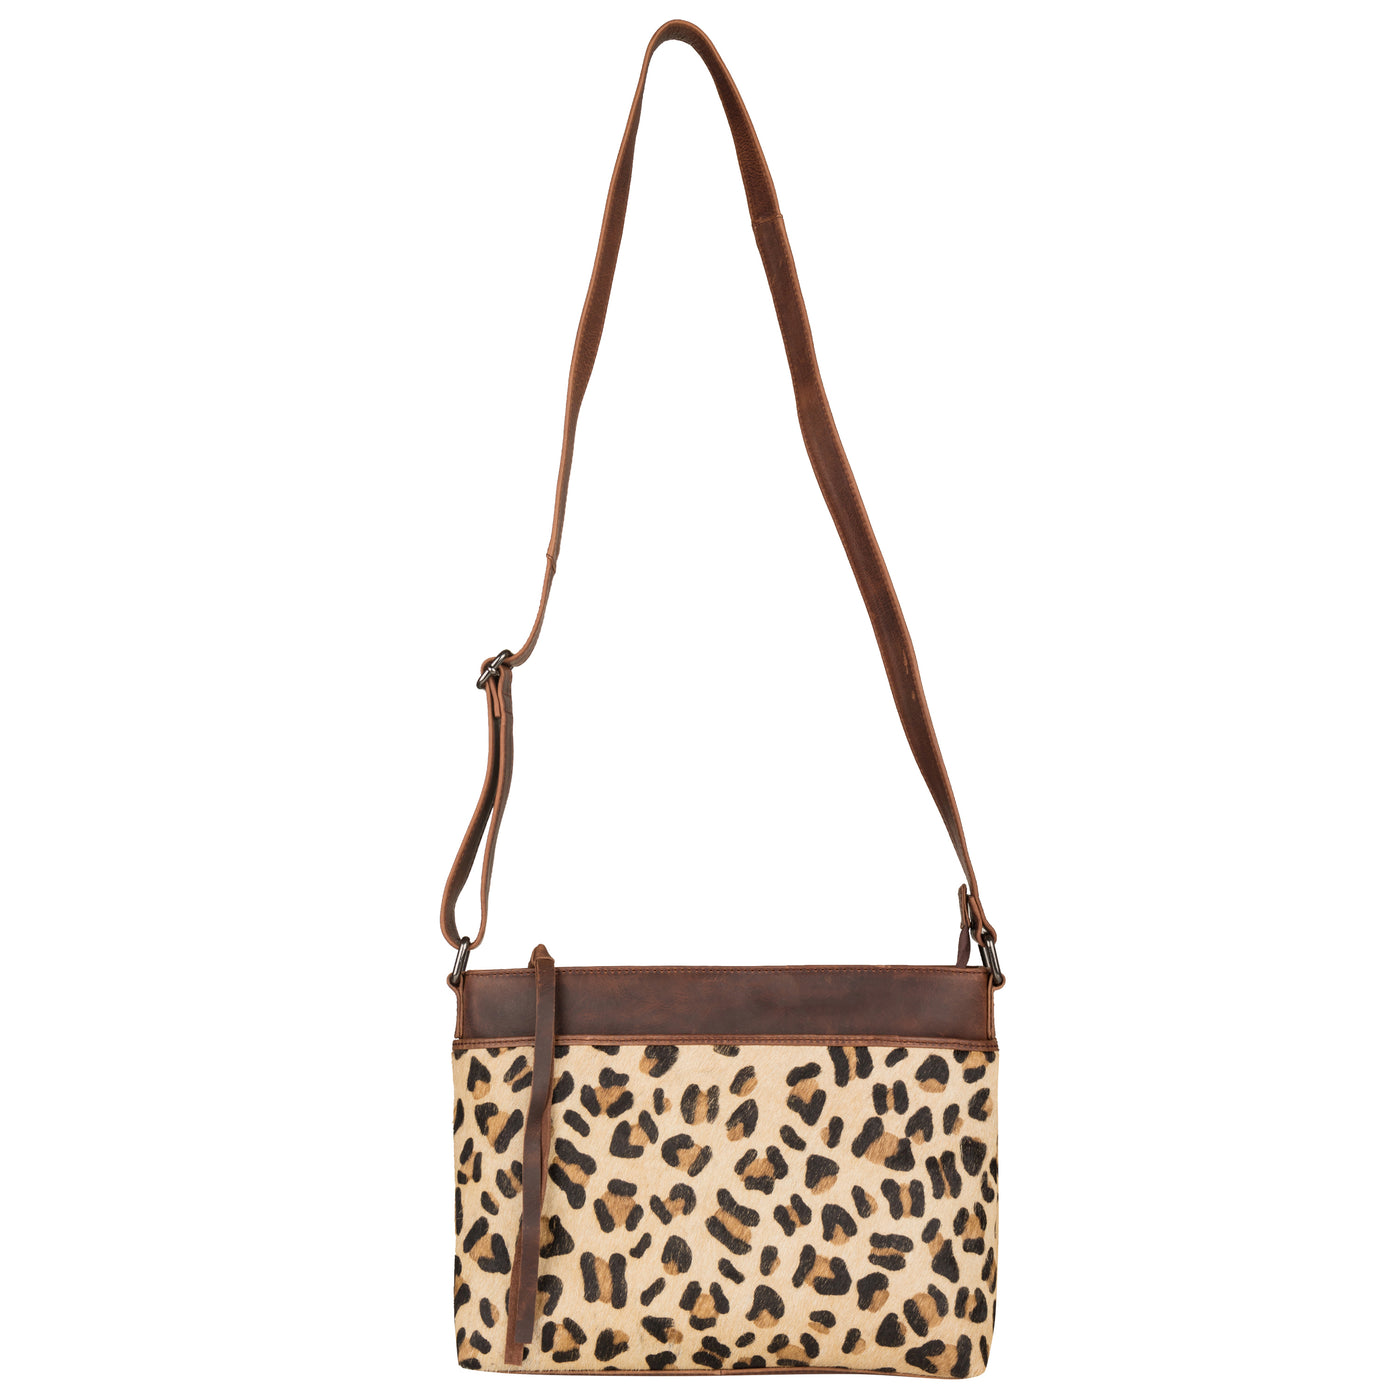 Concealed Carry Josie Leather Hair -On Indian Leopard Crossbody - Lady Conceal - Concealed Carry Purse - soft leather shoulder bags for women's - crossbody bags for everyday use - most popular crossbody bag - crossbody bags for guns - crossbody handgun bag - Unique Hide Purse - Conceal Carry Western Purse - Stylish Carry Josie Leather Bag - Bag for Conceal Carrying Women - Gun Bag for Women